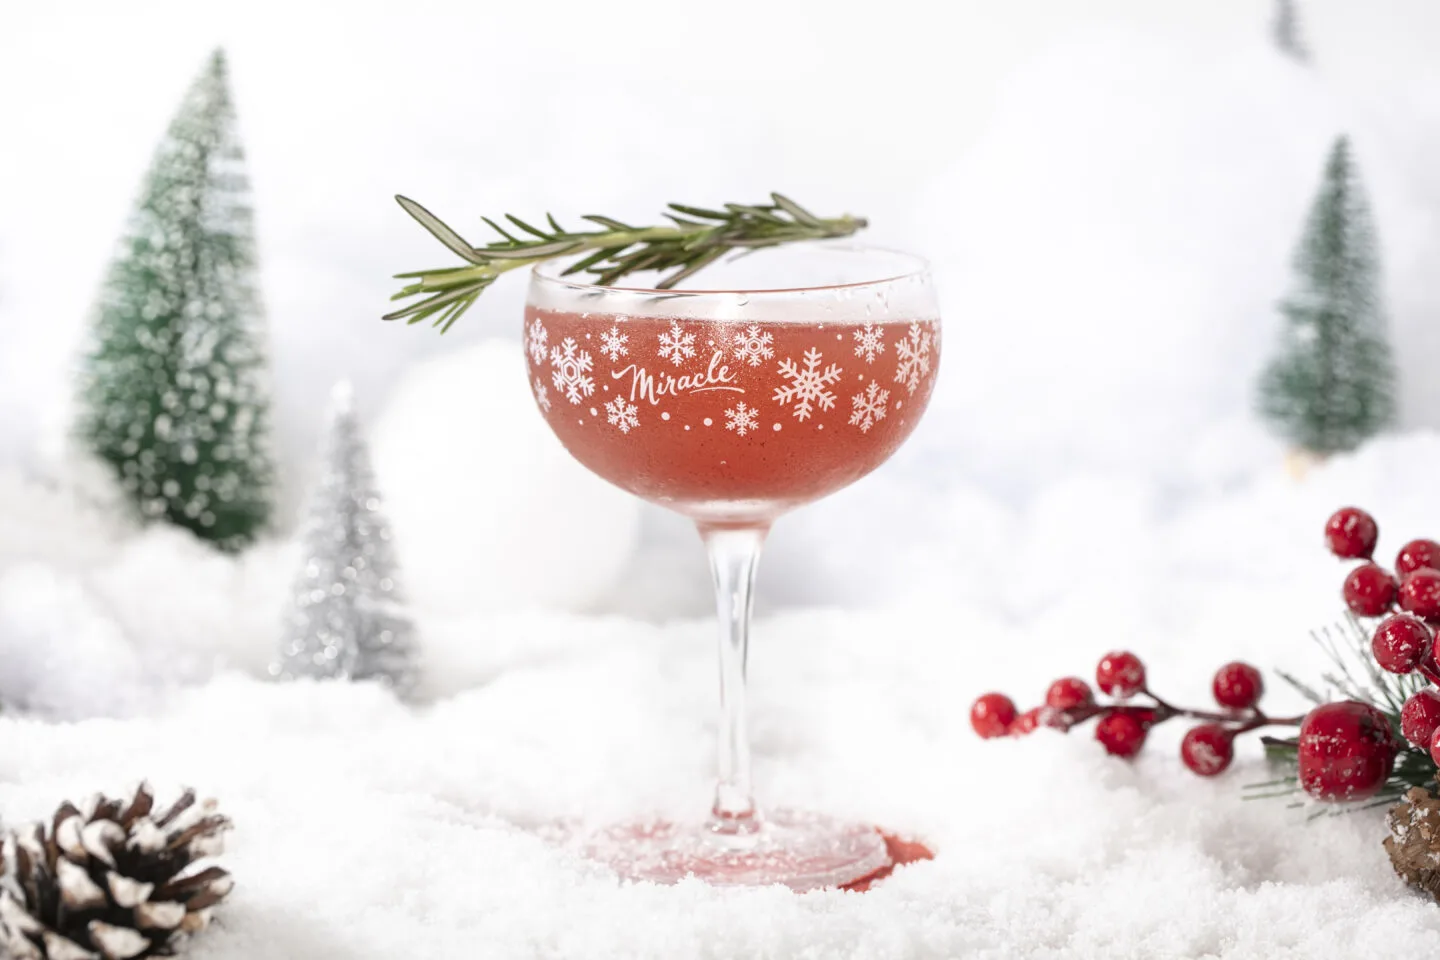 Christmas cocktail from Miracle Toronto holiday popup bar